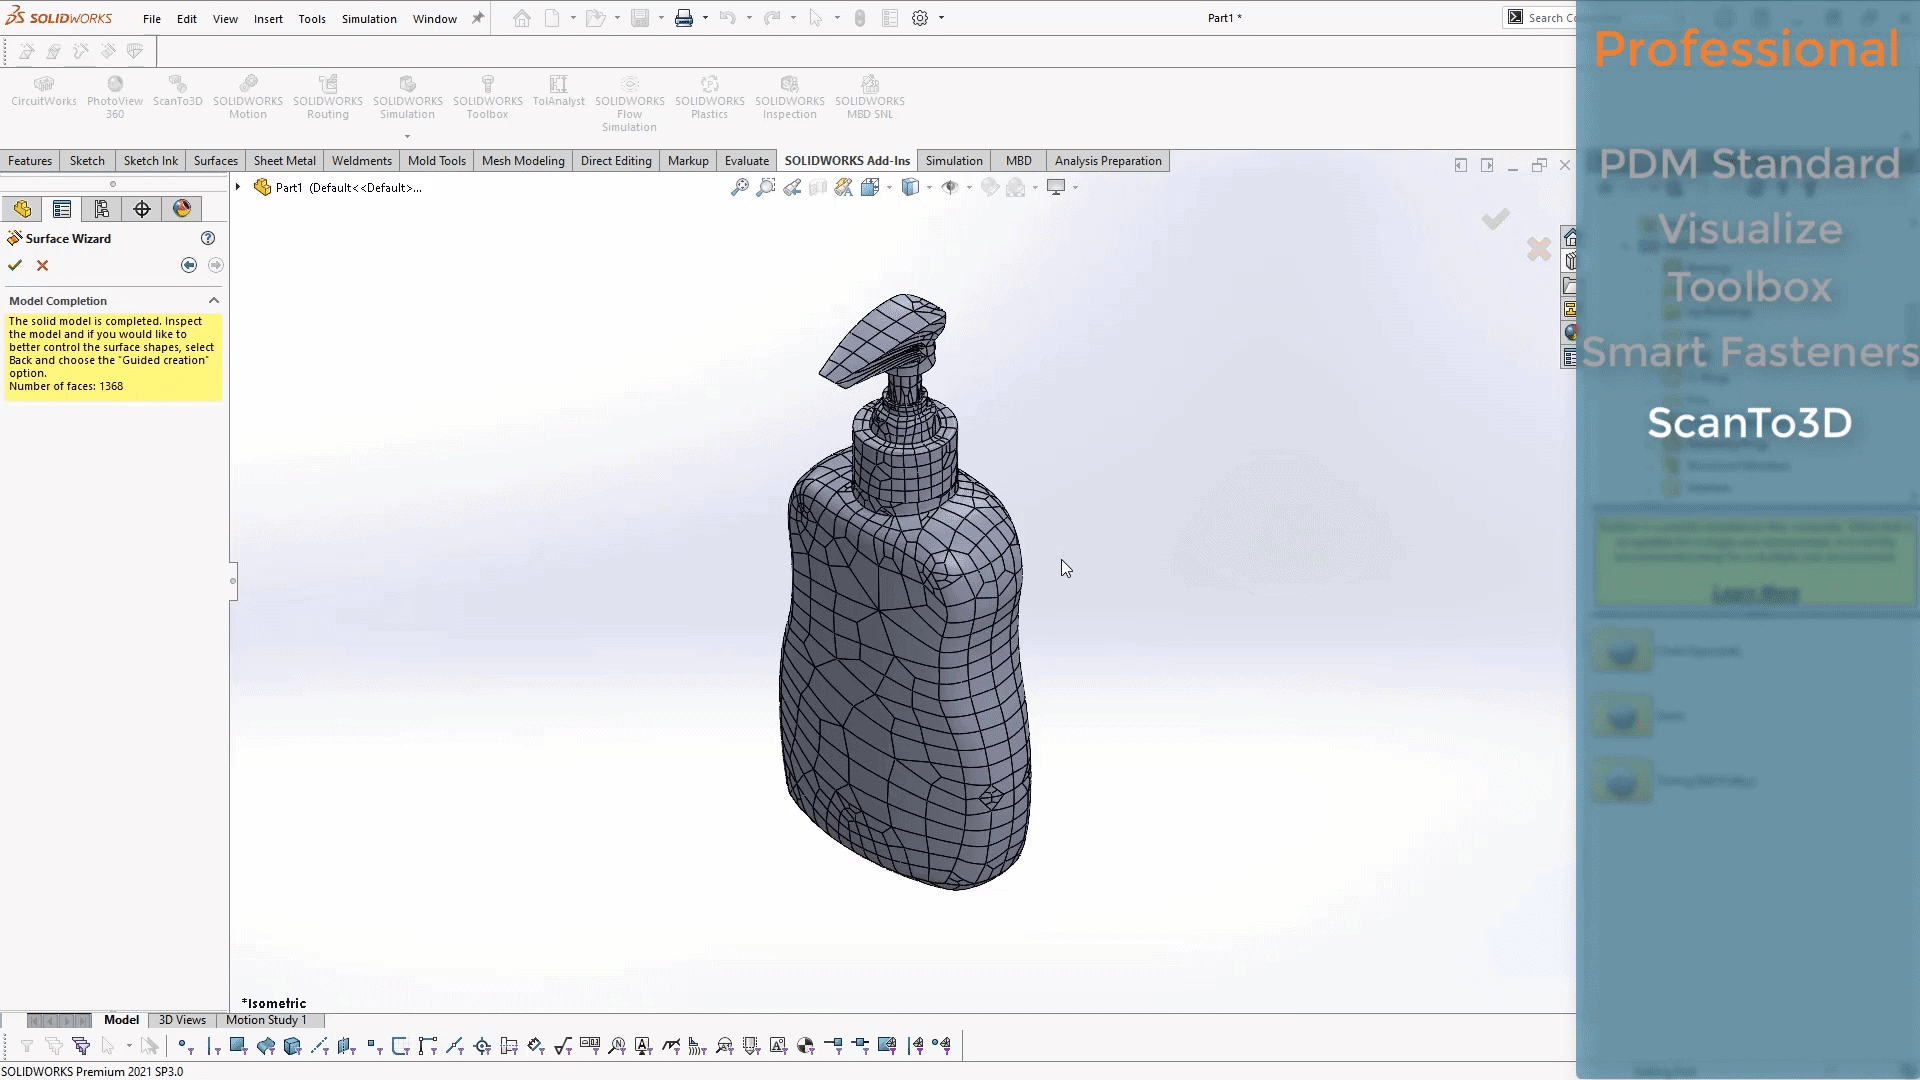 solidworks professional scanto3d 2